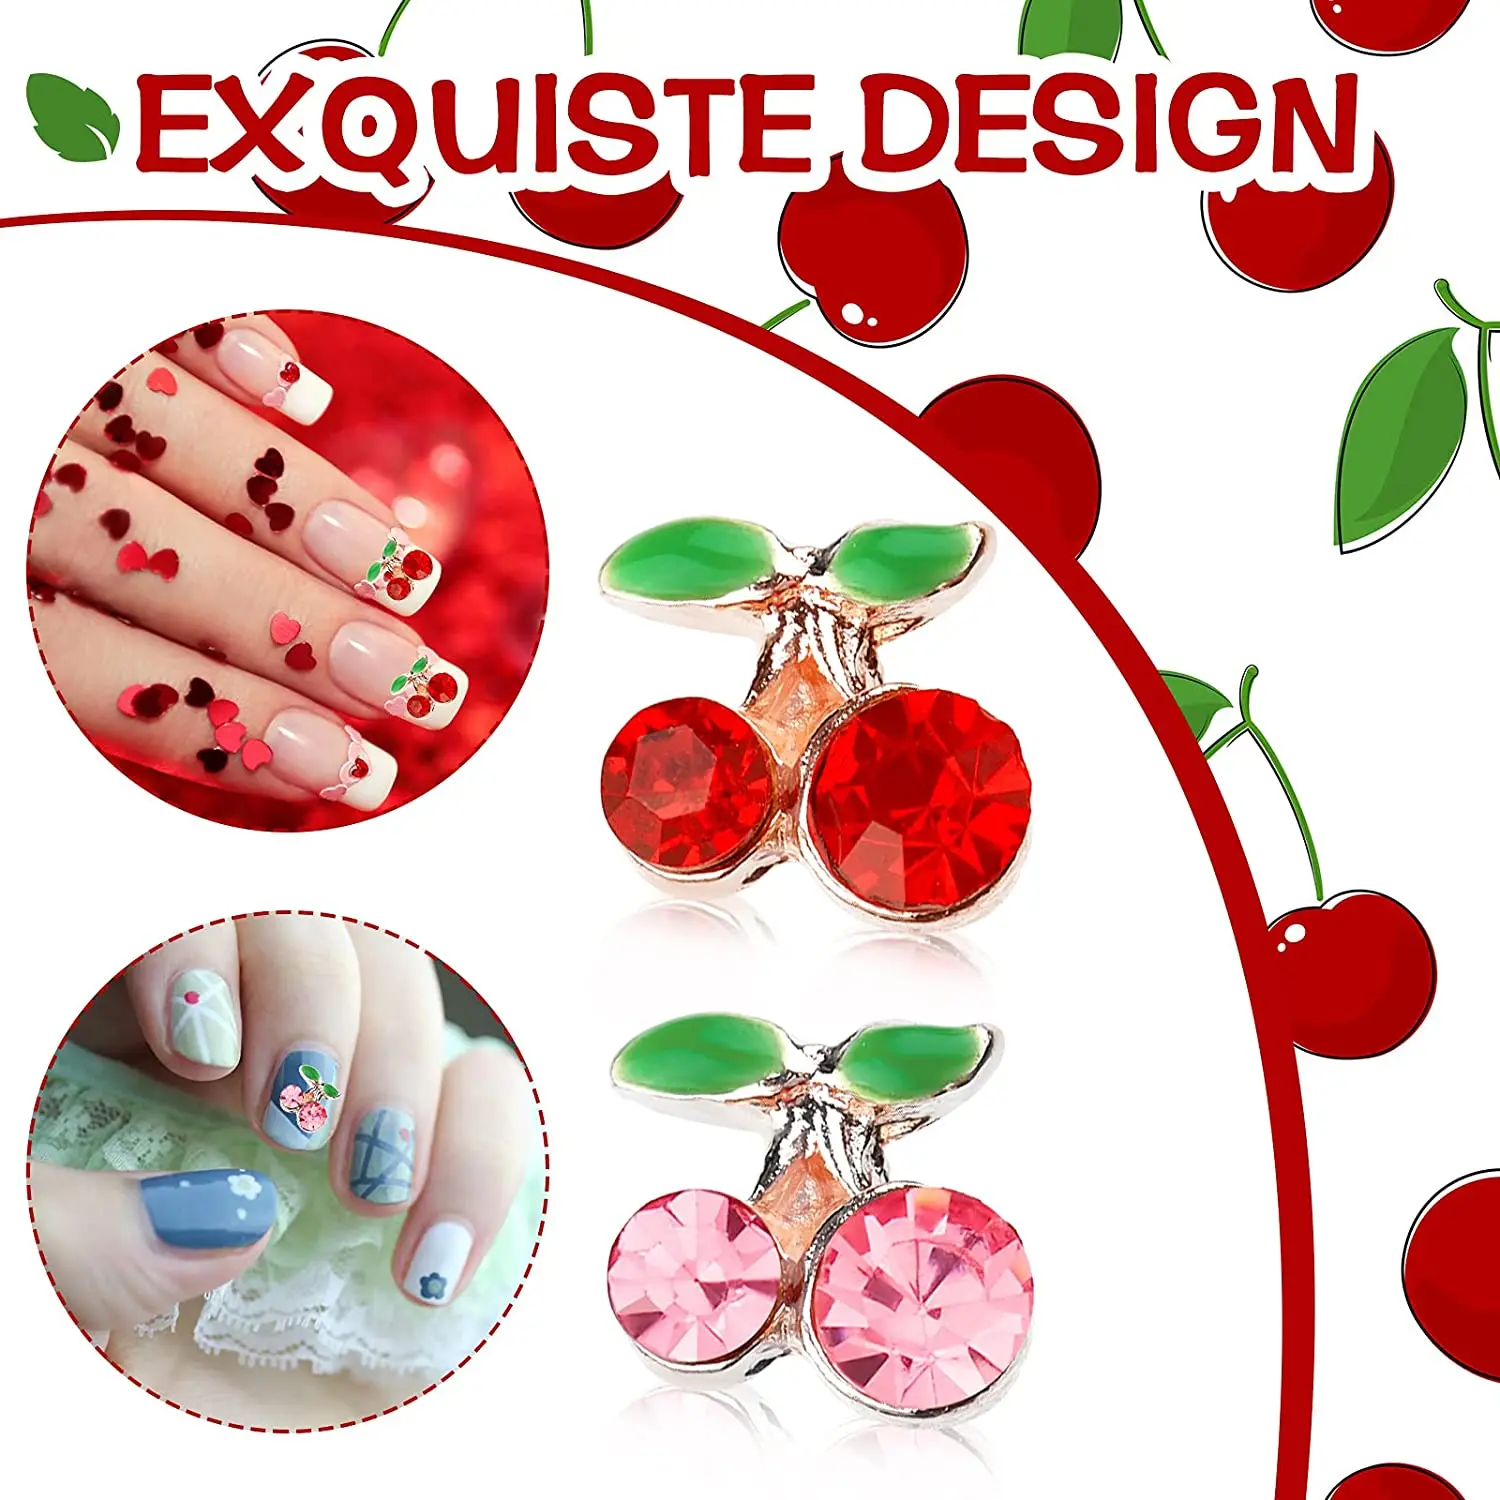 Nail Art Kit Nail Art Decoration With 3d Rhinestone For Girls Ages